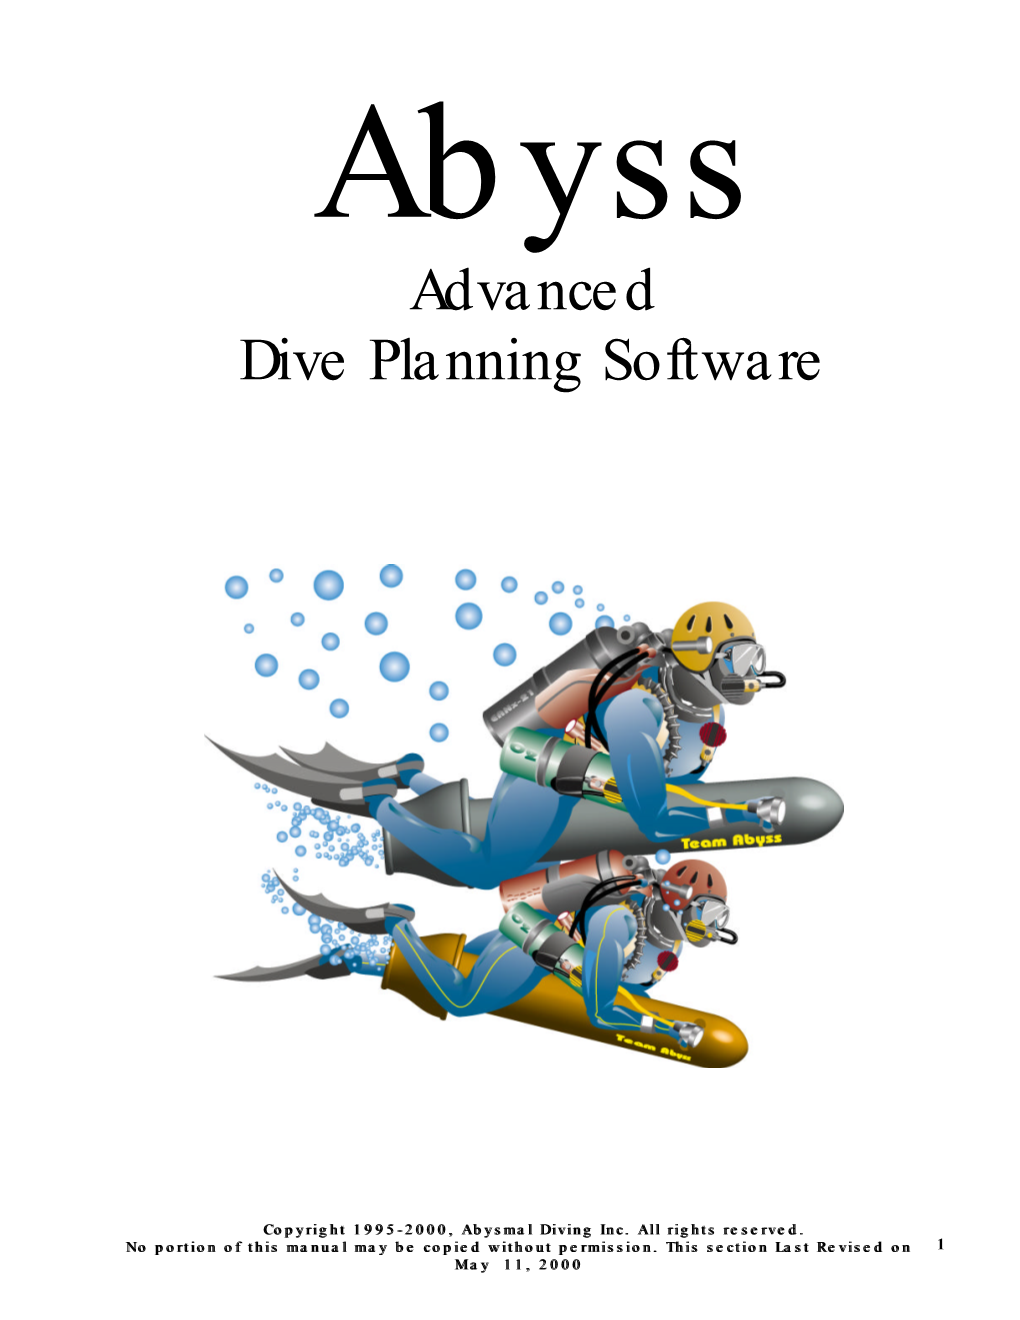 Advanced Dive Planning Software